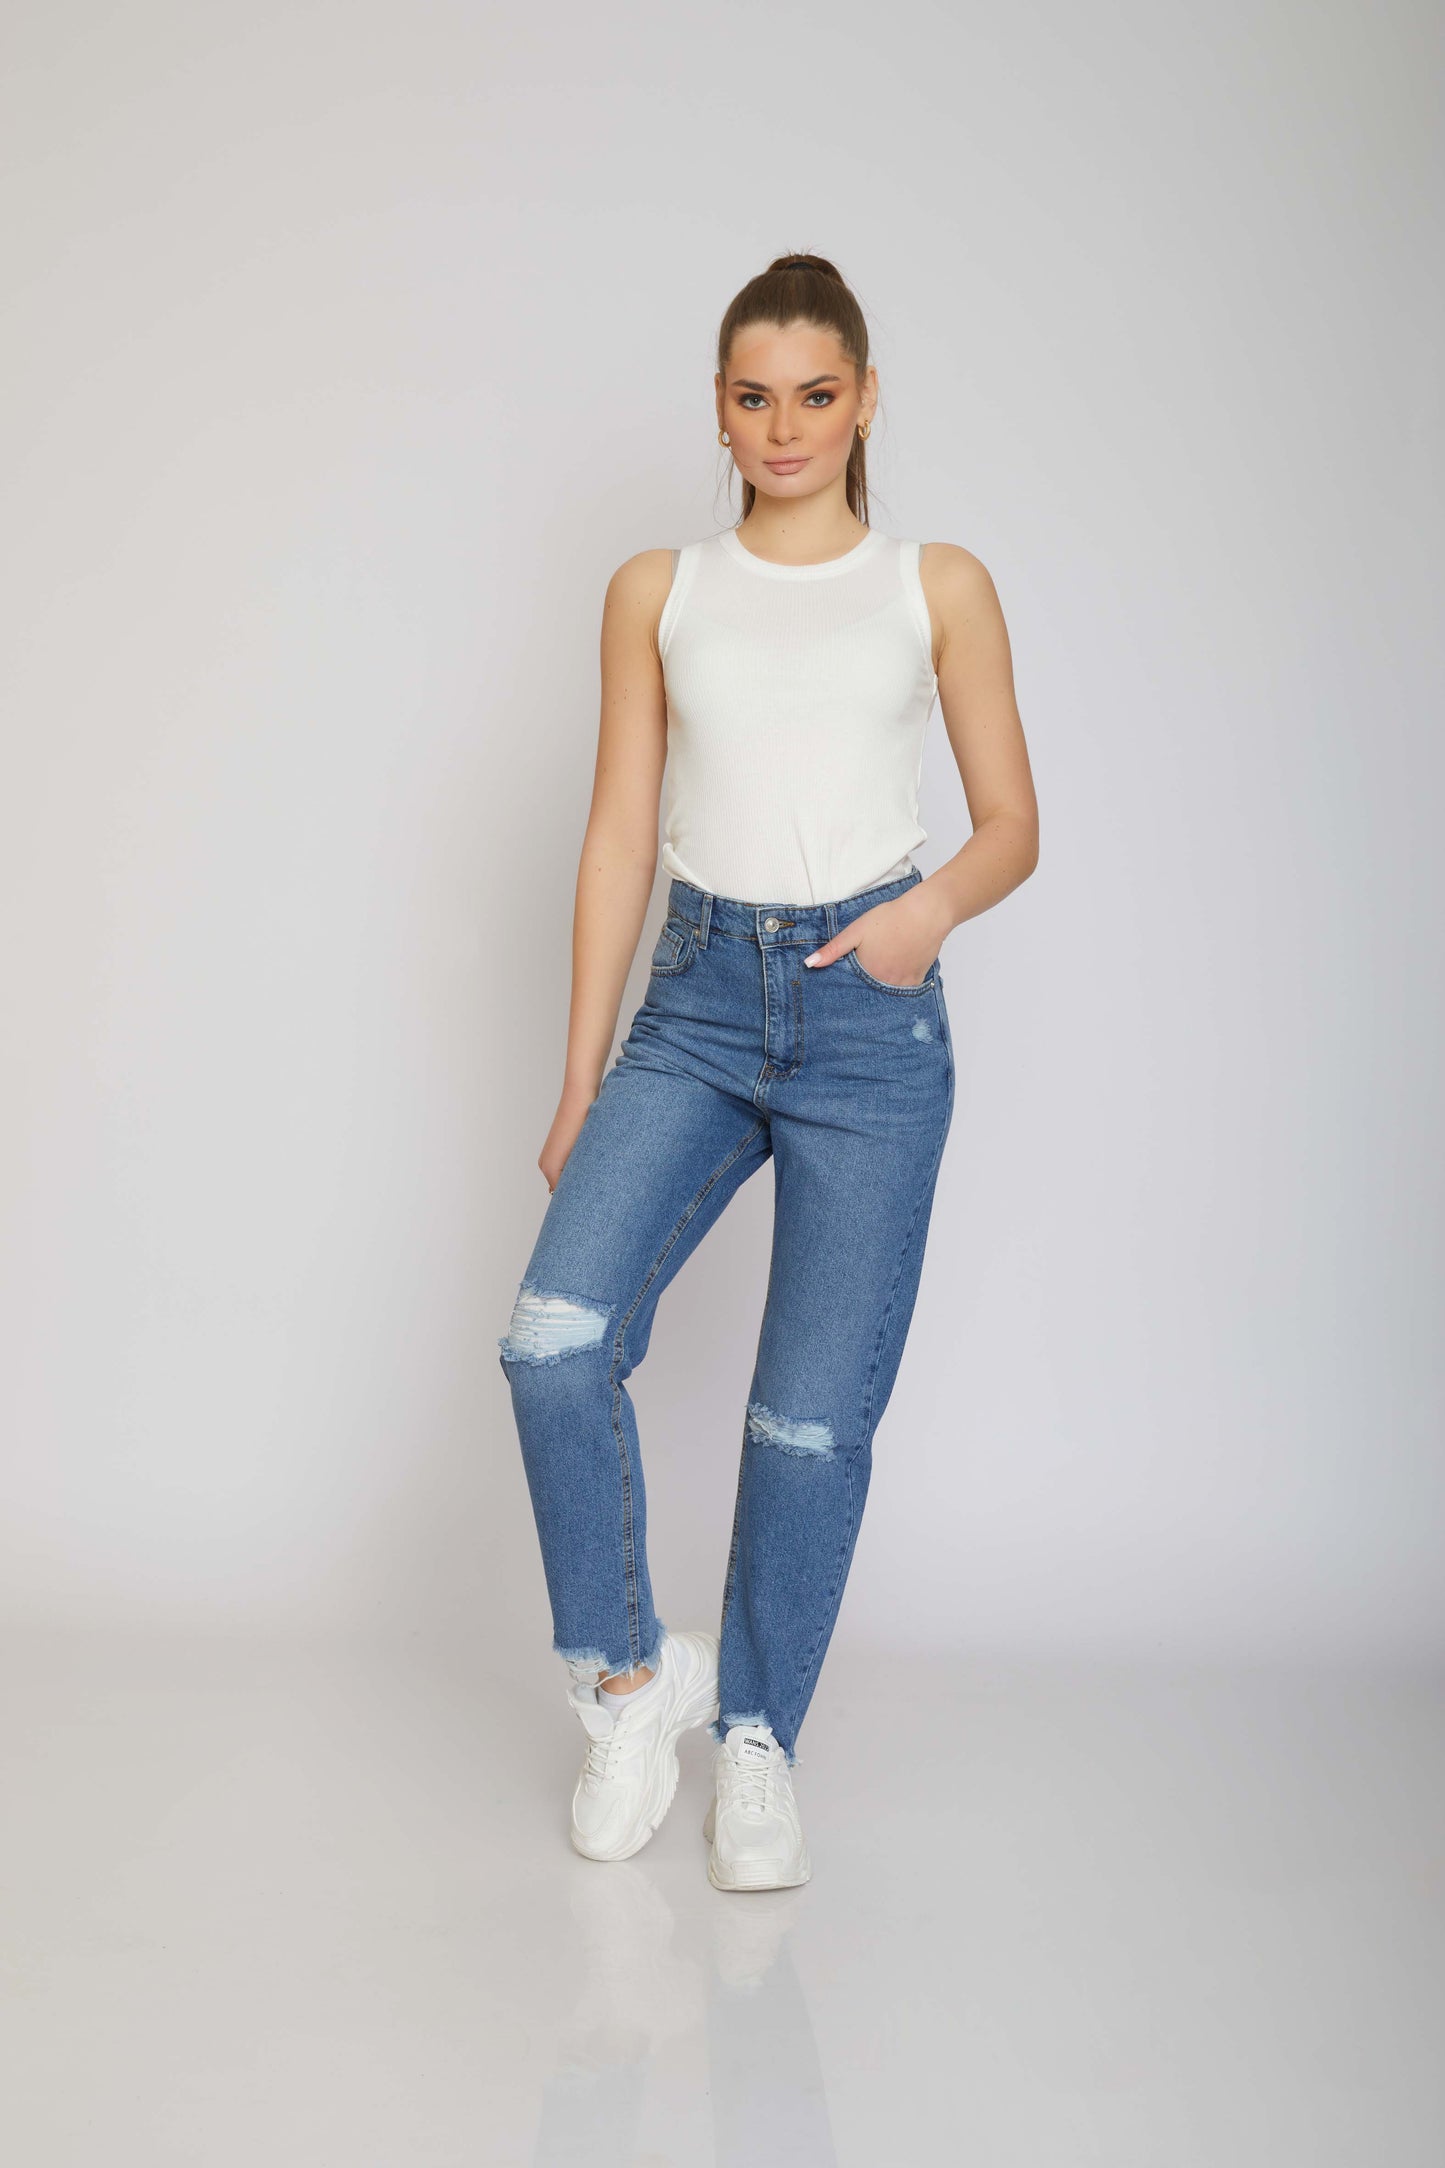 Ripped Mom Fit Jeans - For Women